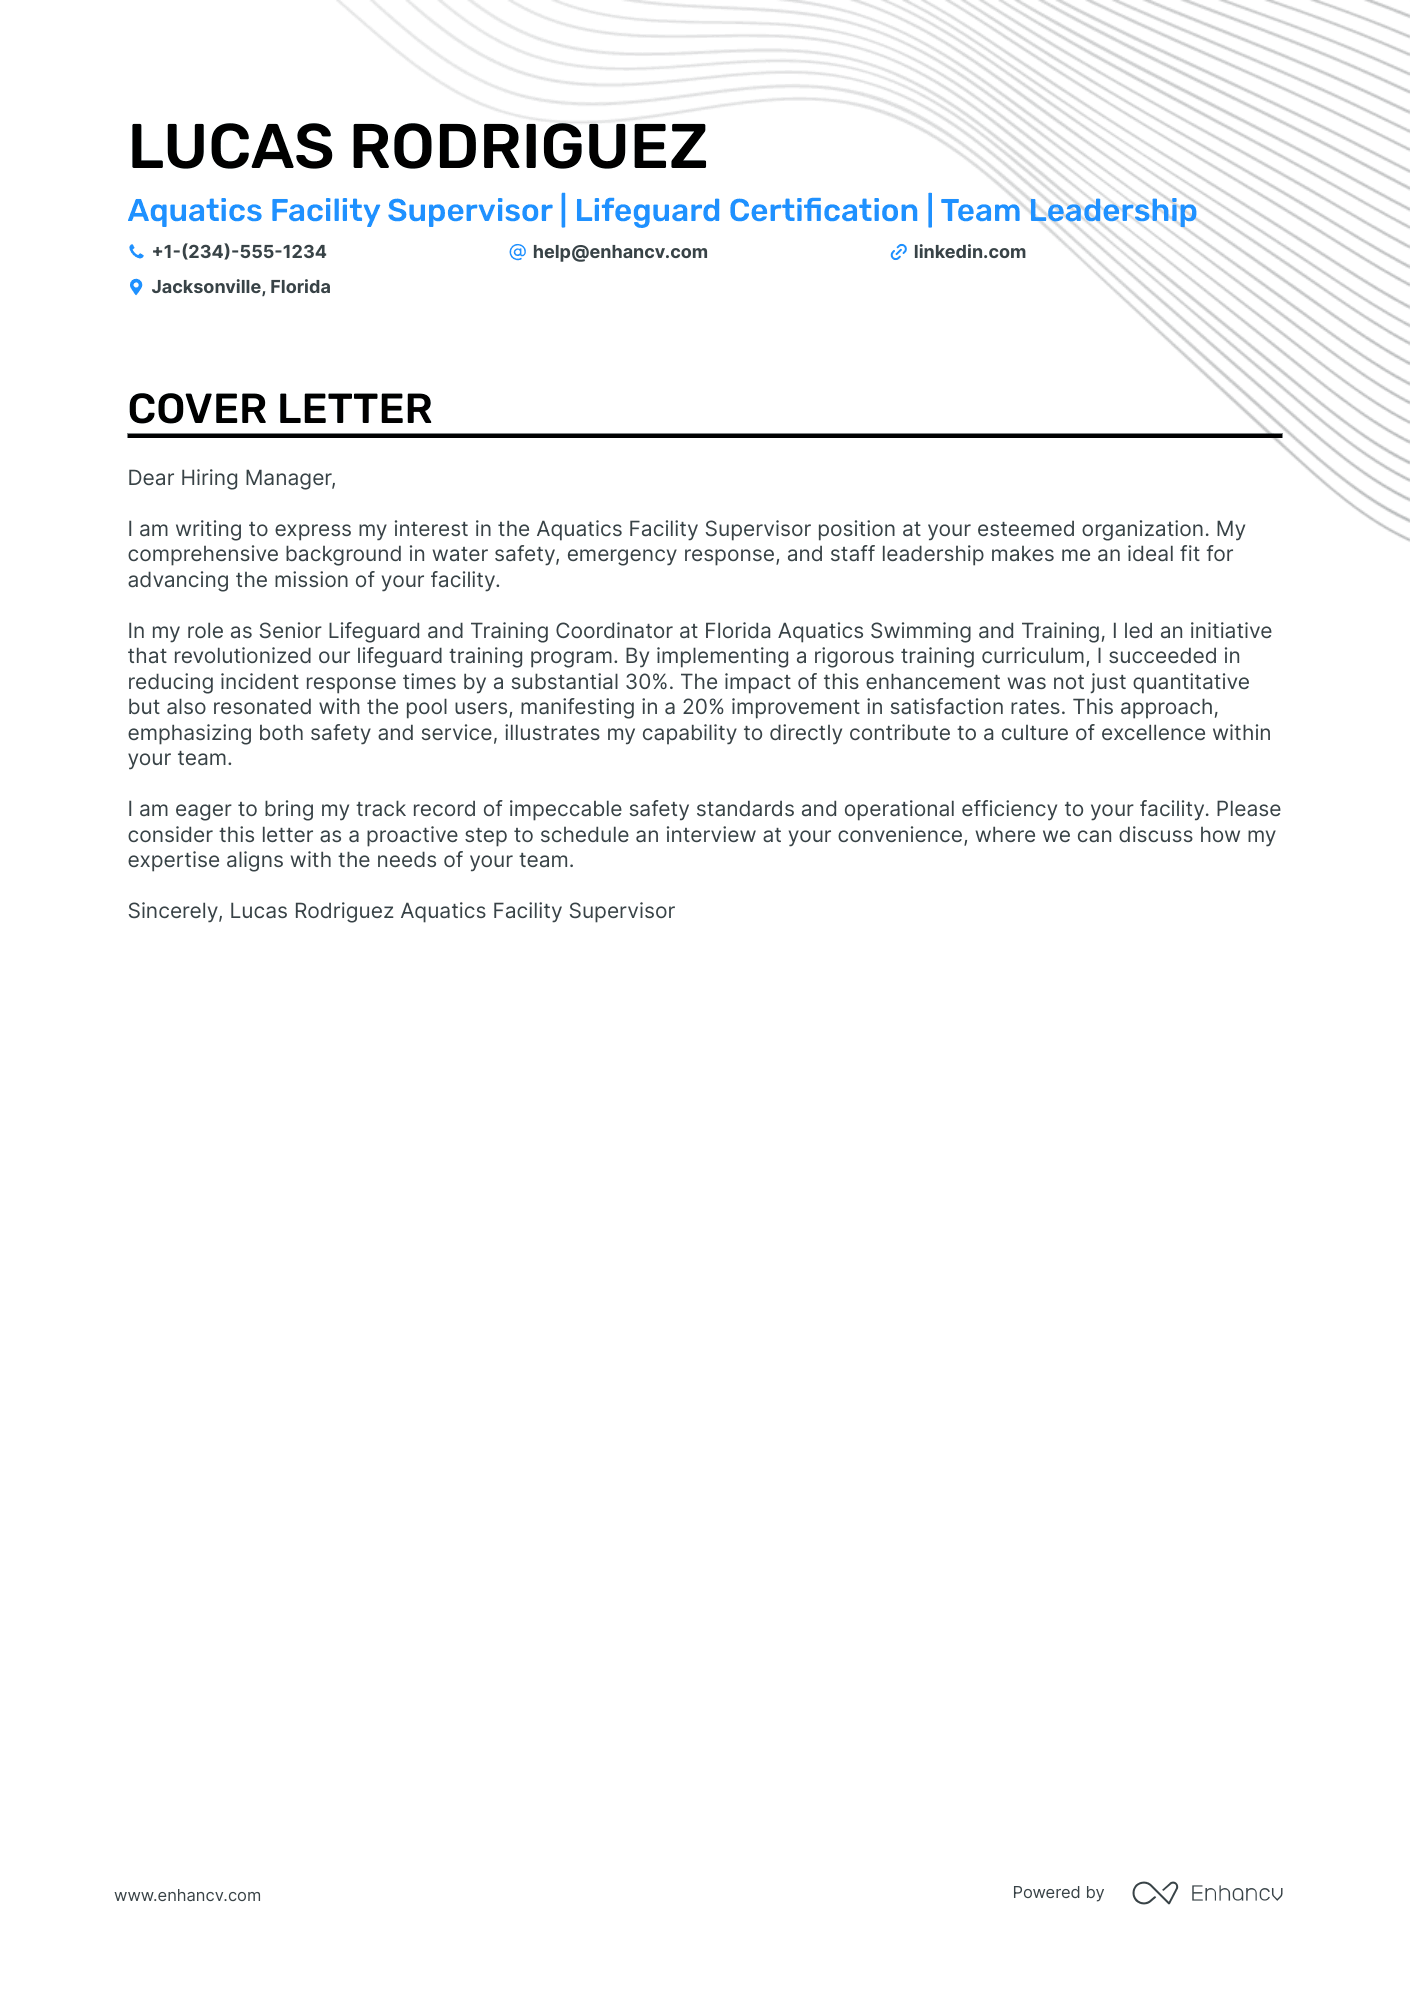 Lifeguard cover letter